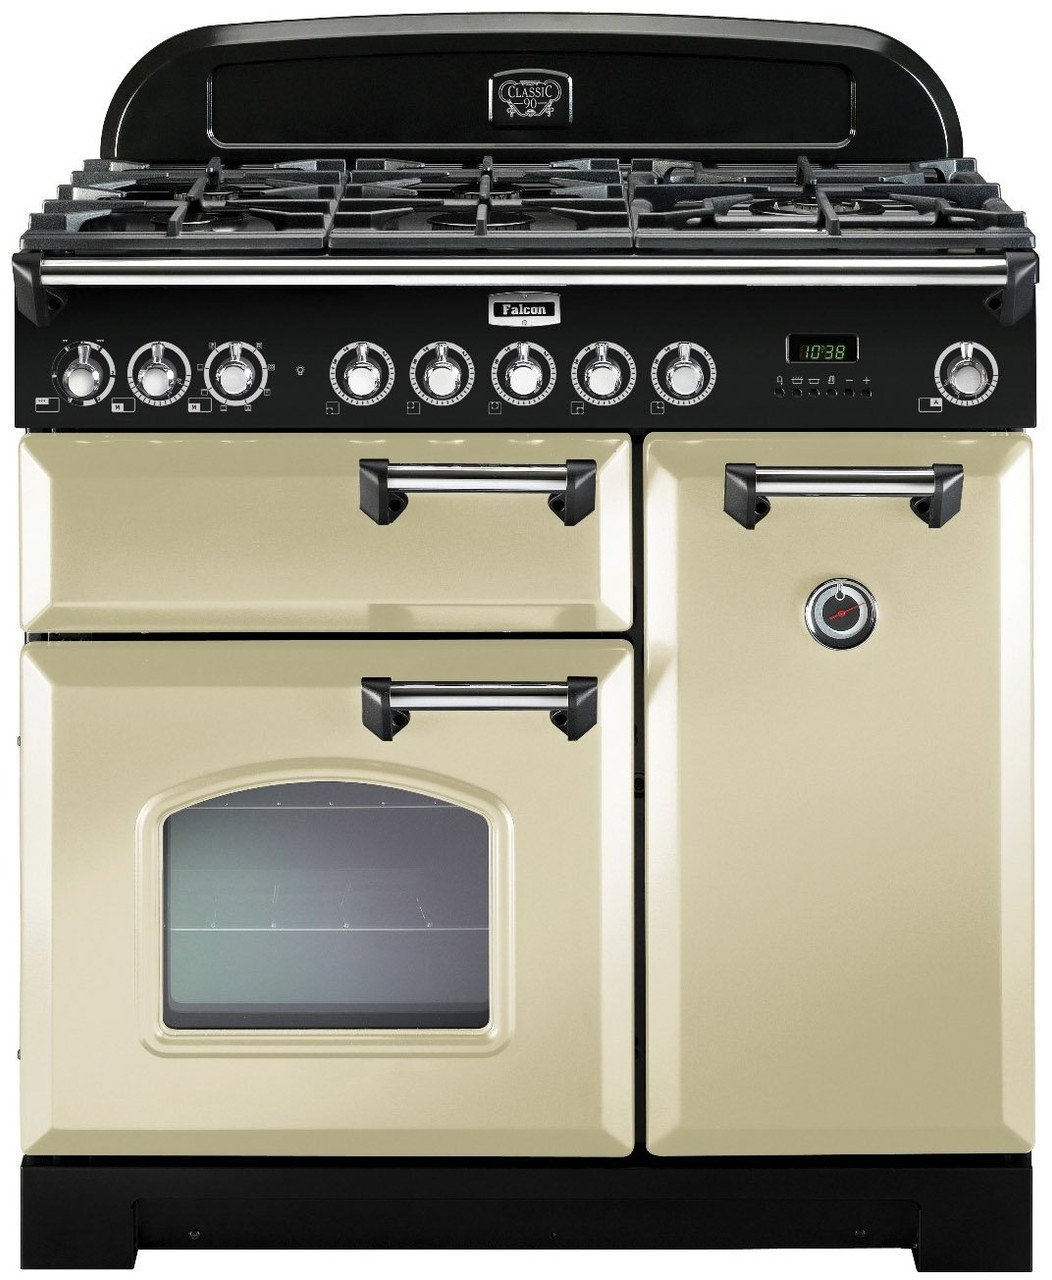 CDL90DFCRCH - 90cm Freestanding Dual Fuel Oven/Stove - Cream